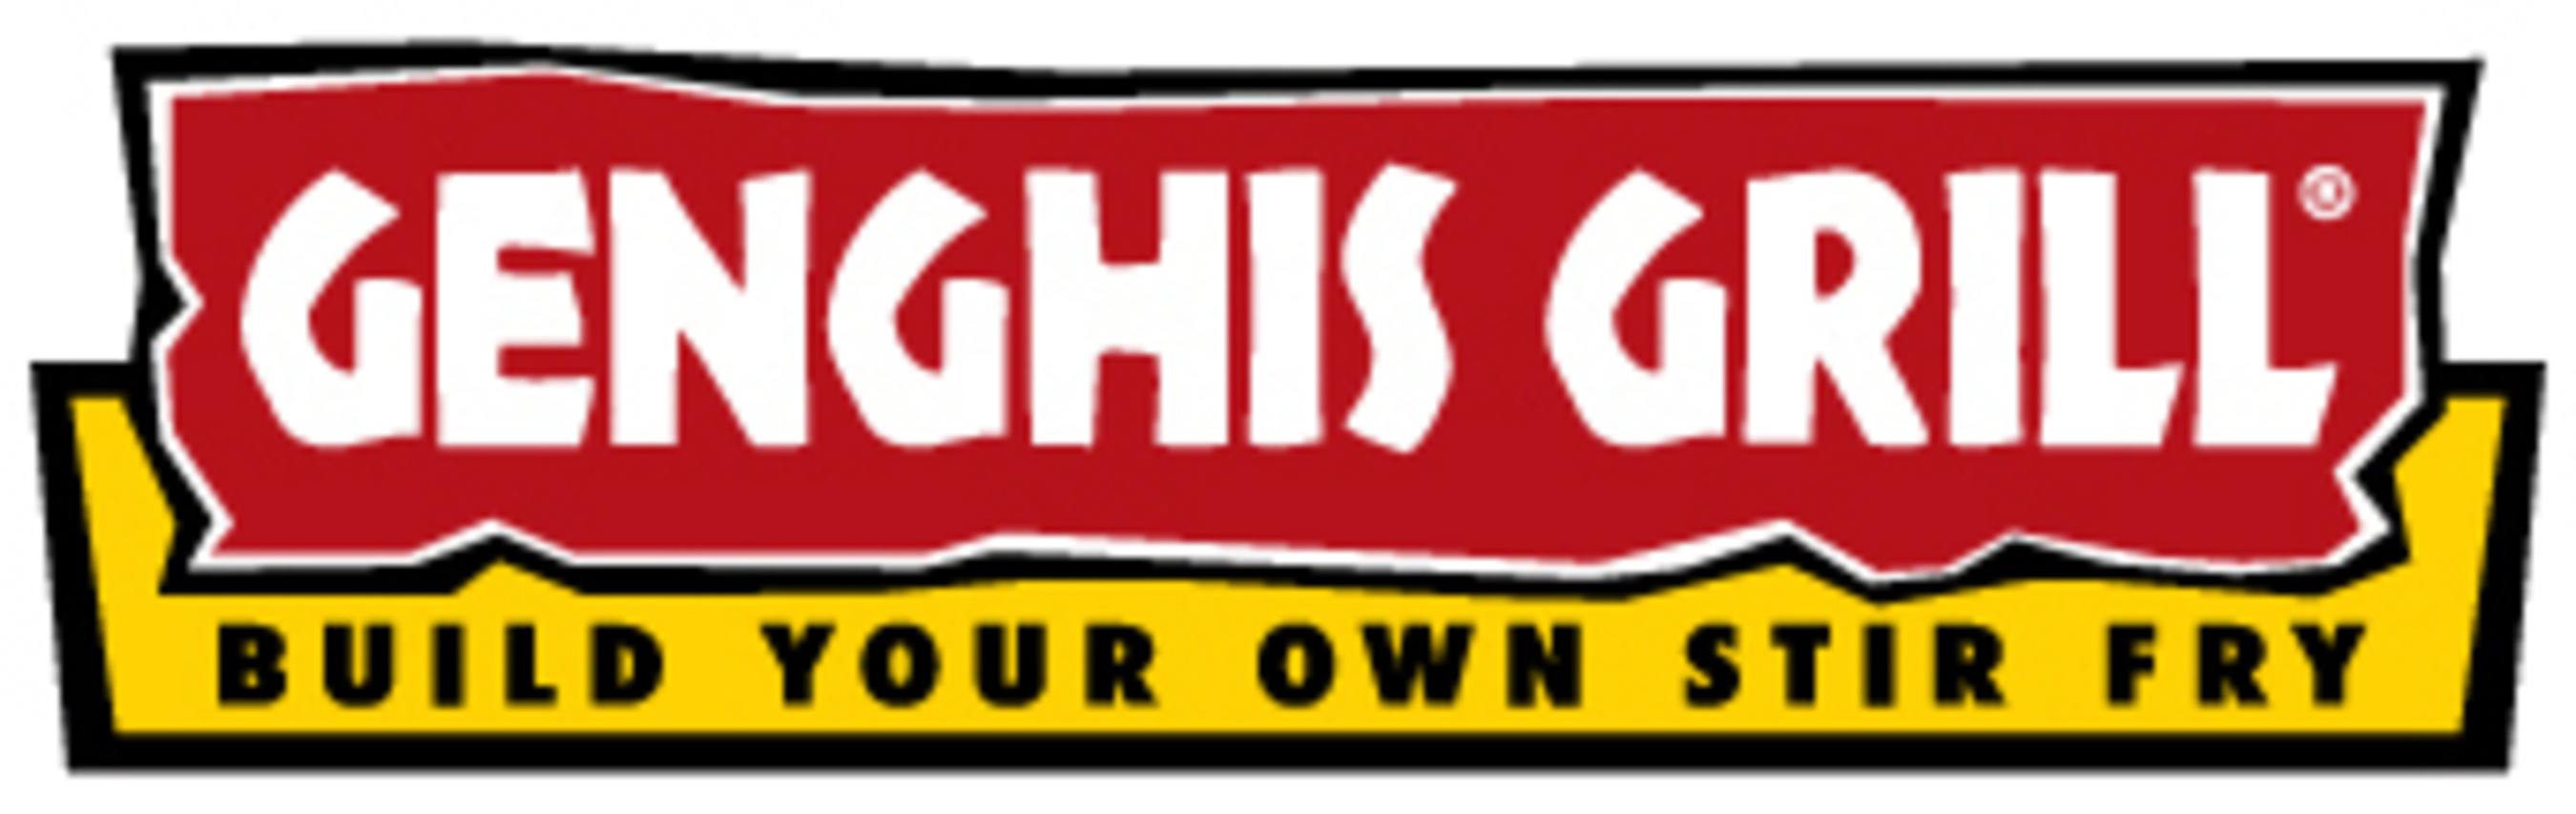 Genghis Grill has more than 100 locations nationwide (PRNewsFoto/Genghis Grill)